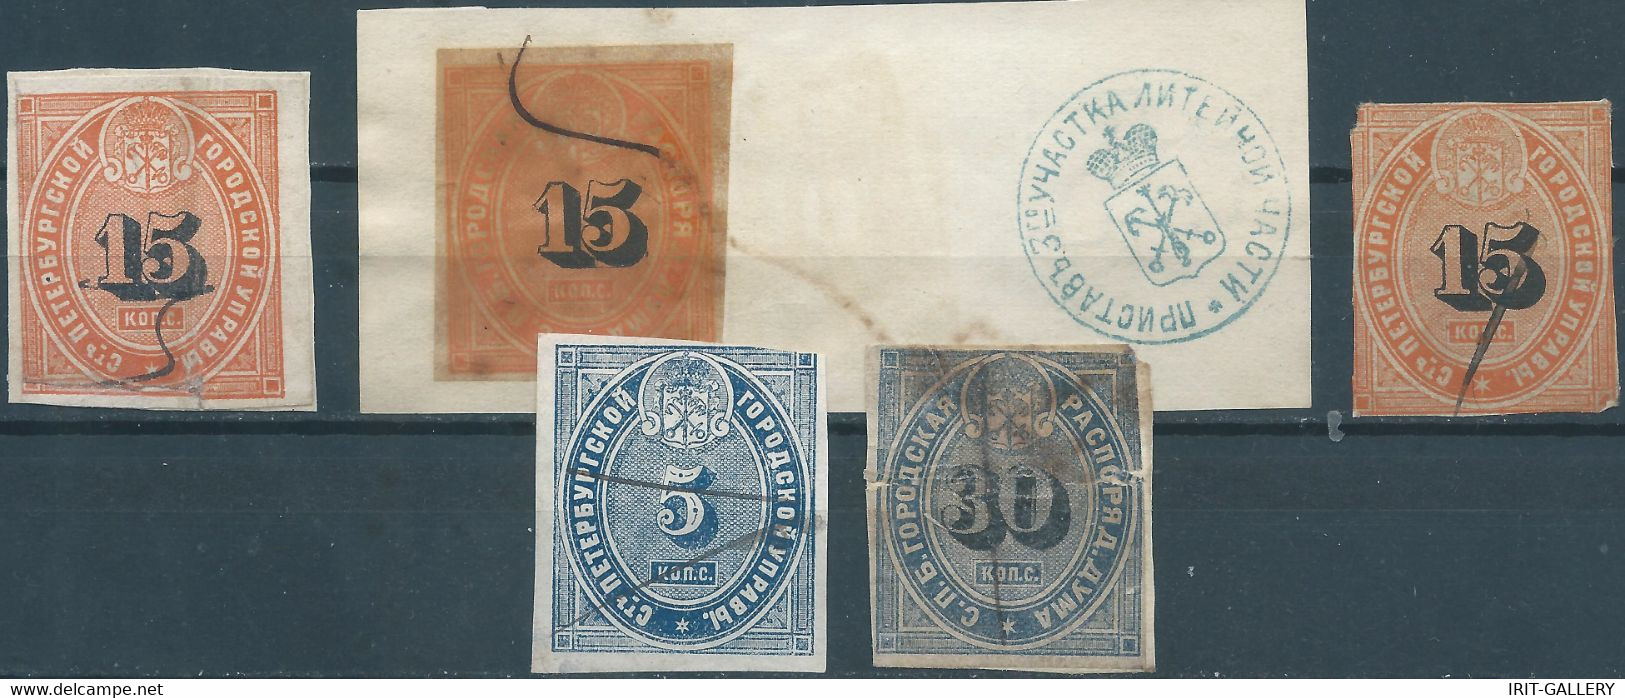 Russia - Russie - Russland,SAINT PETERSBURG 1860/1885 Revenue Stamps Tax And Services  Used On The Cut Paper,very Old - Revenue Stamps